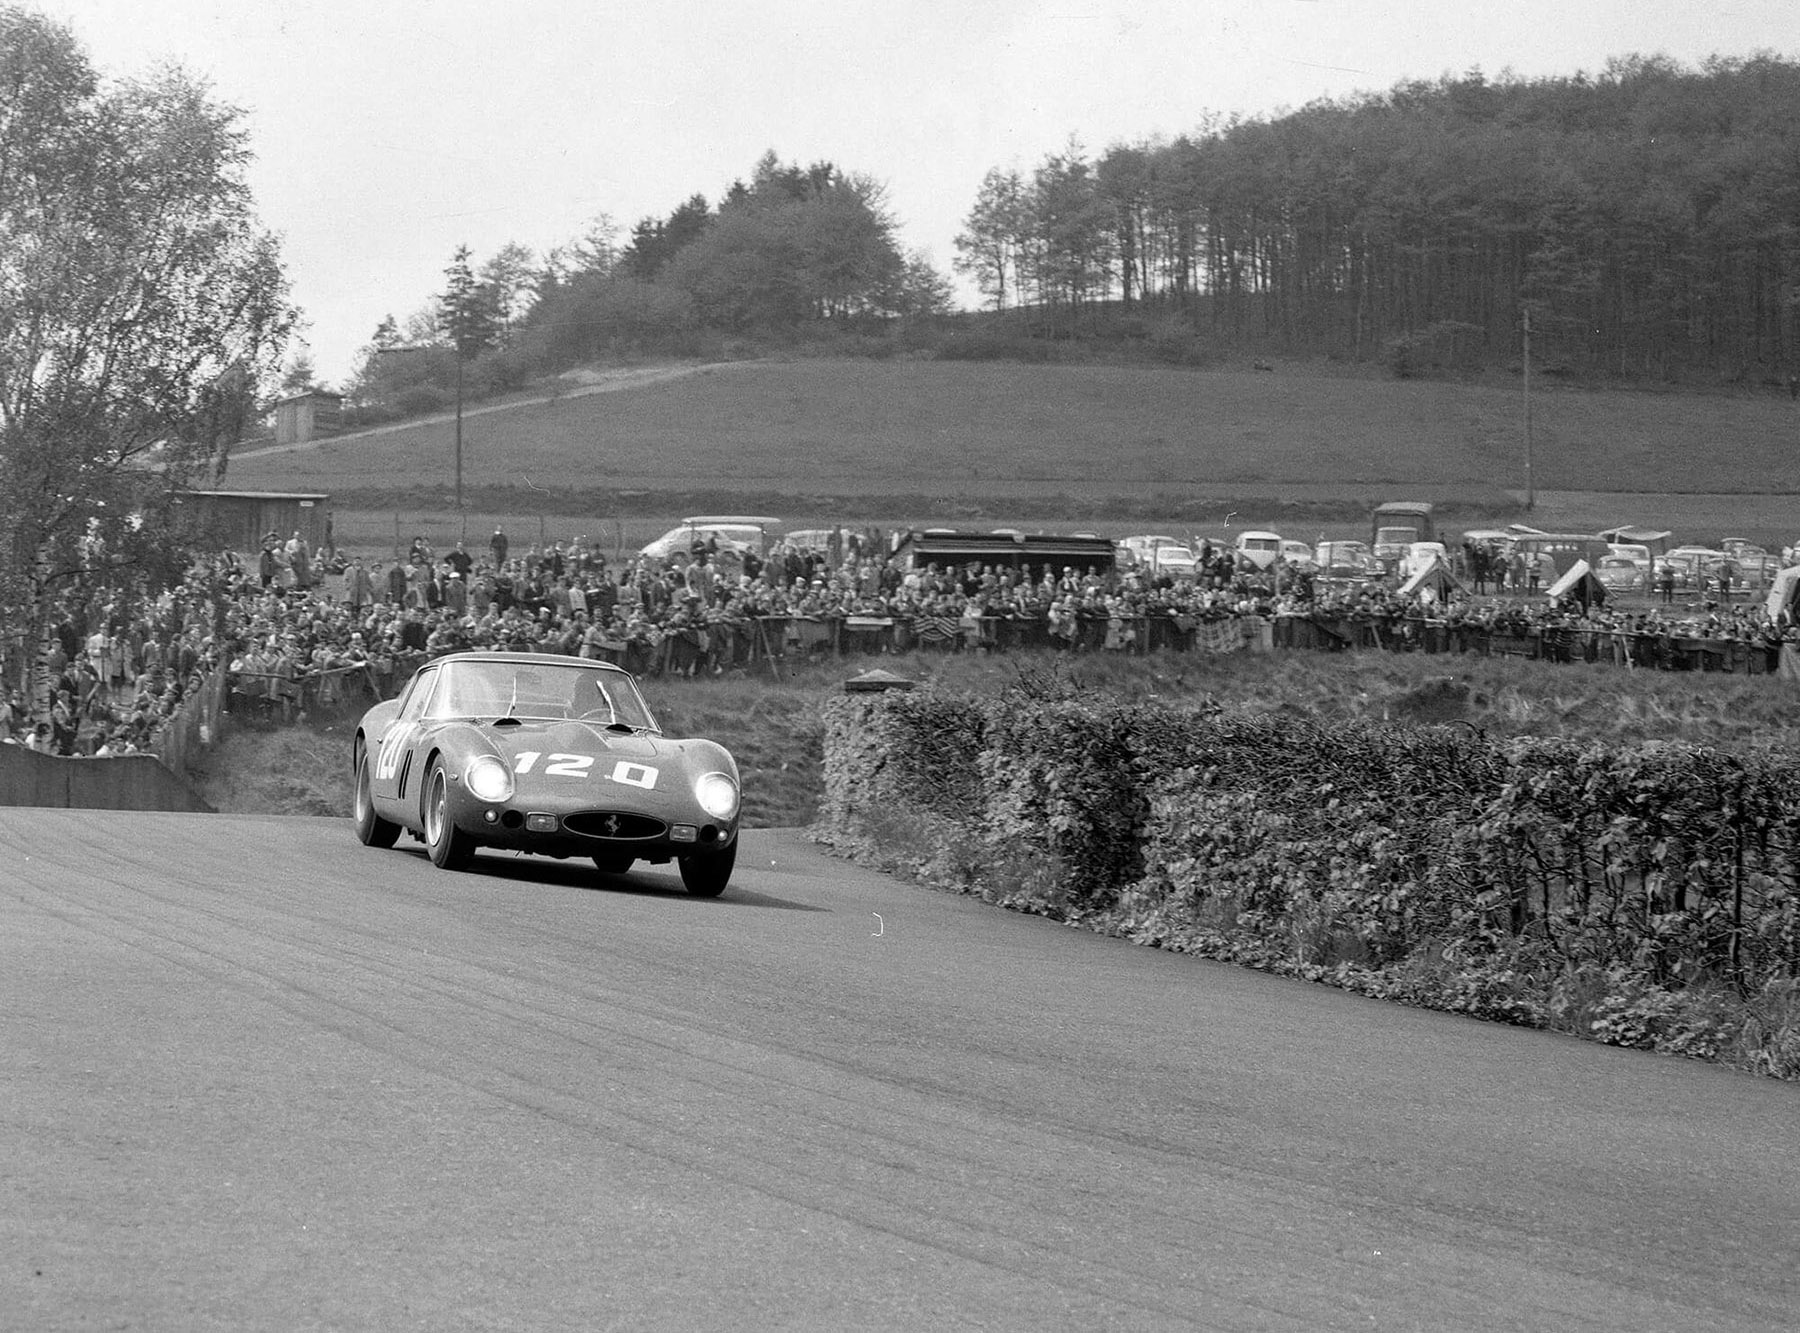 Chassis no. 3765, race #120, driven by Mike Parkes and Willy Mairesse during the Nürburgring 1000 kms at Nürburgring on 27 May 1962.